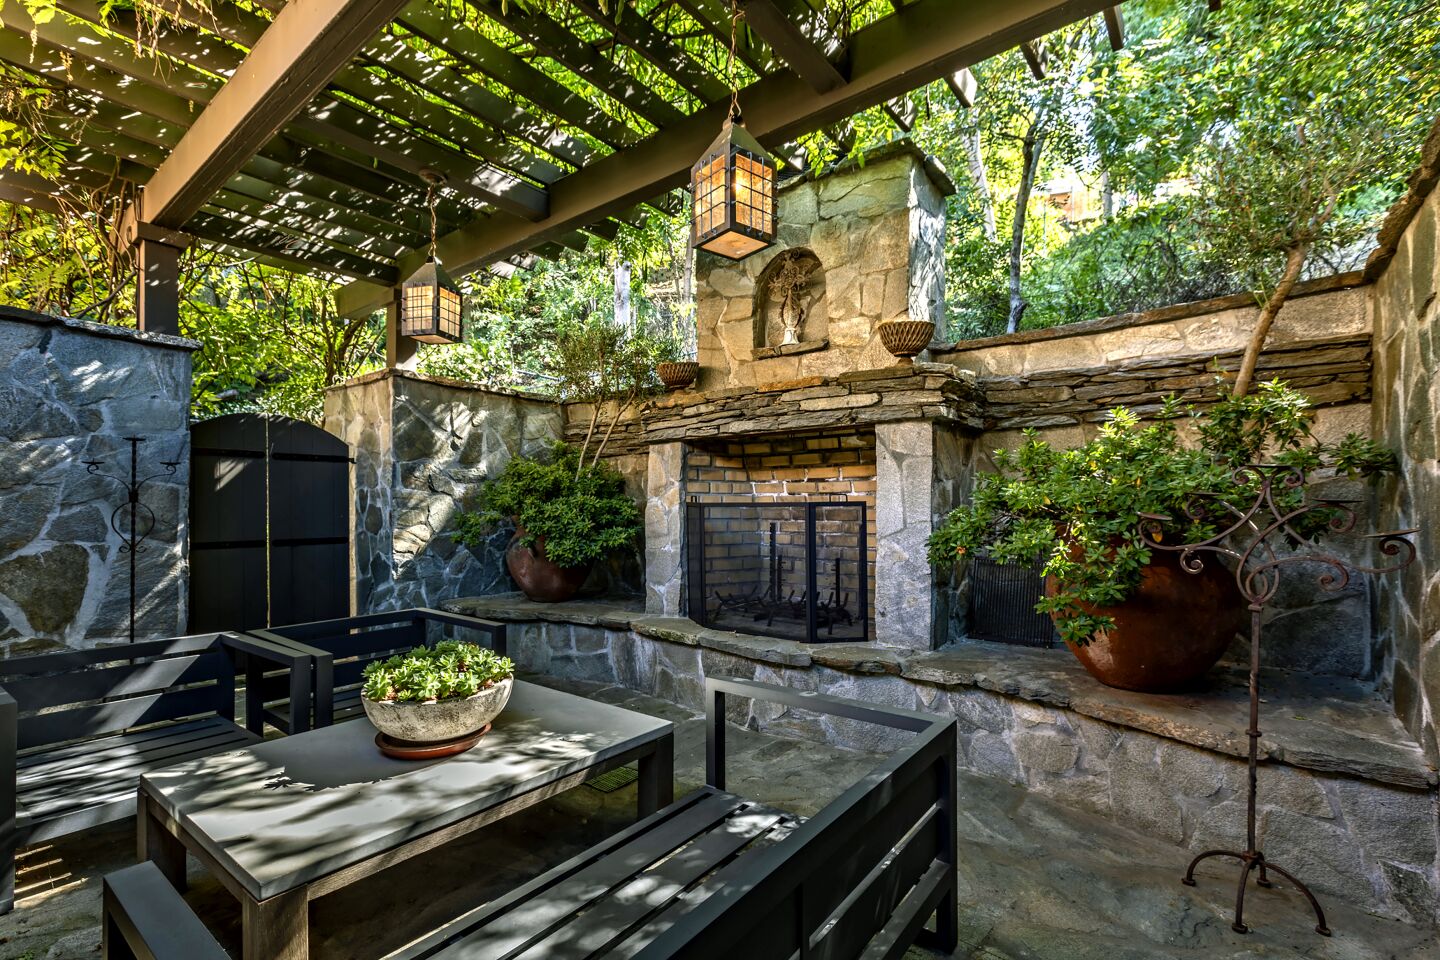 The courtyard is dominated by a brick-and-stone fireplace.